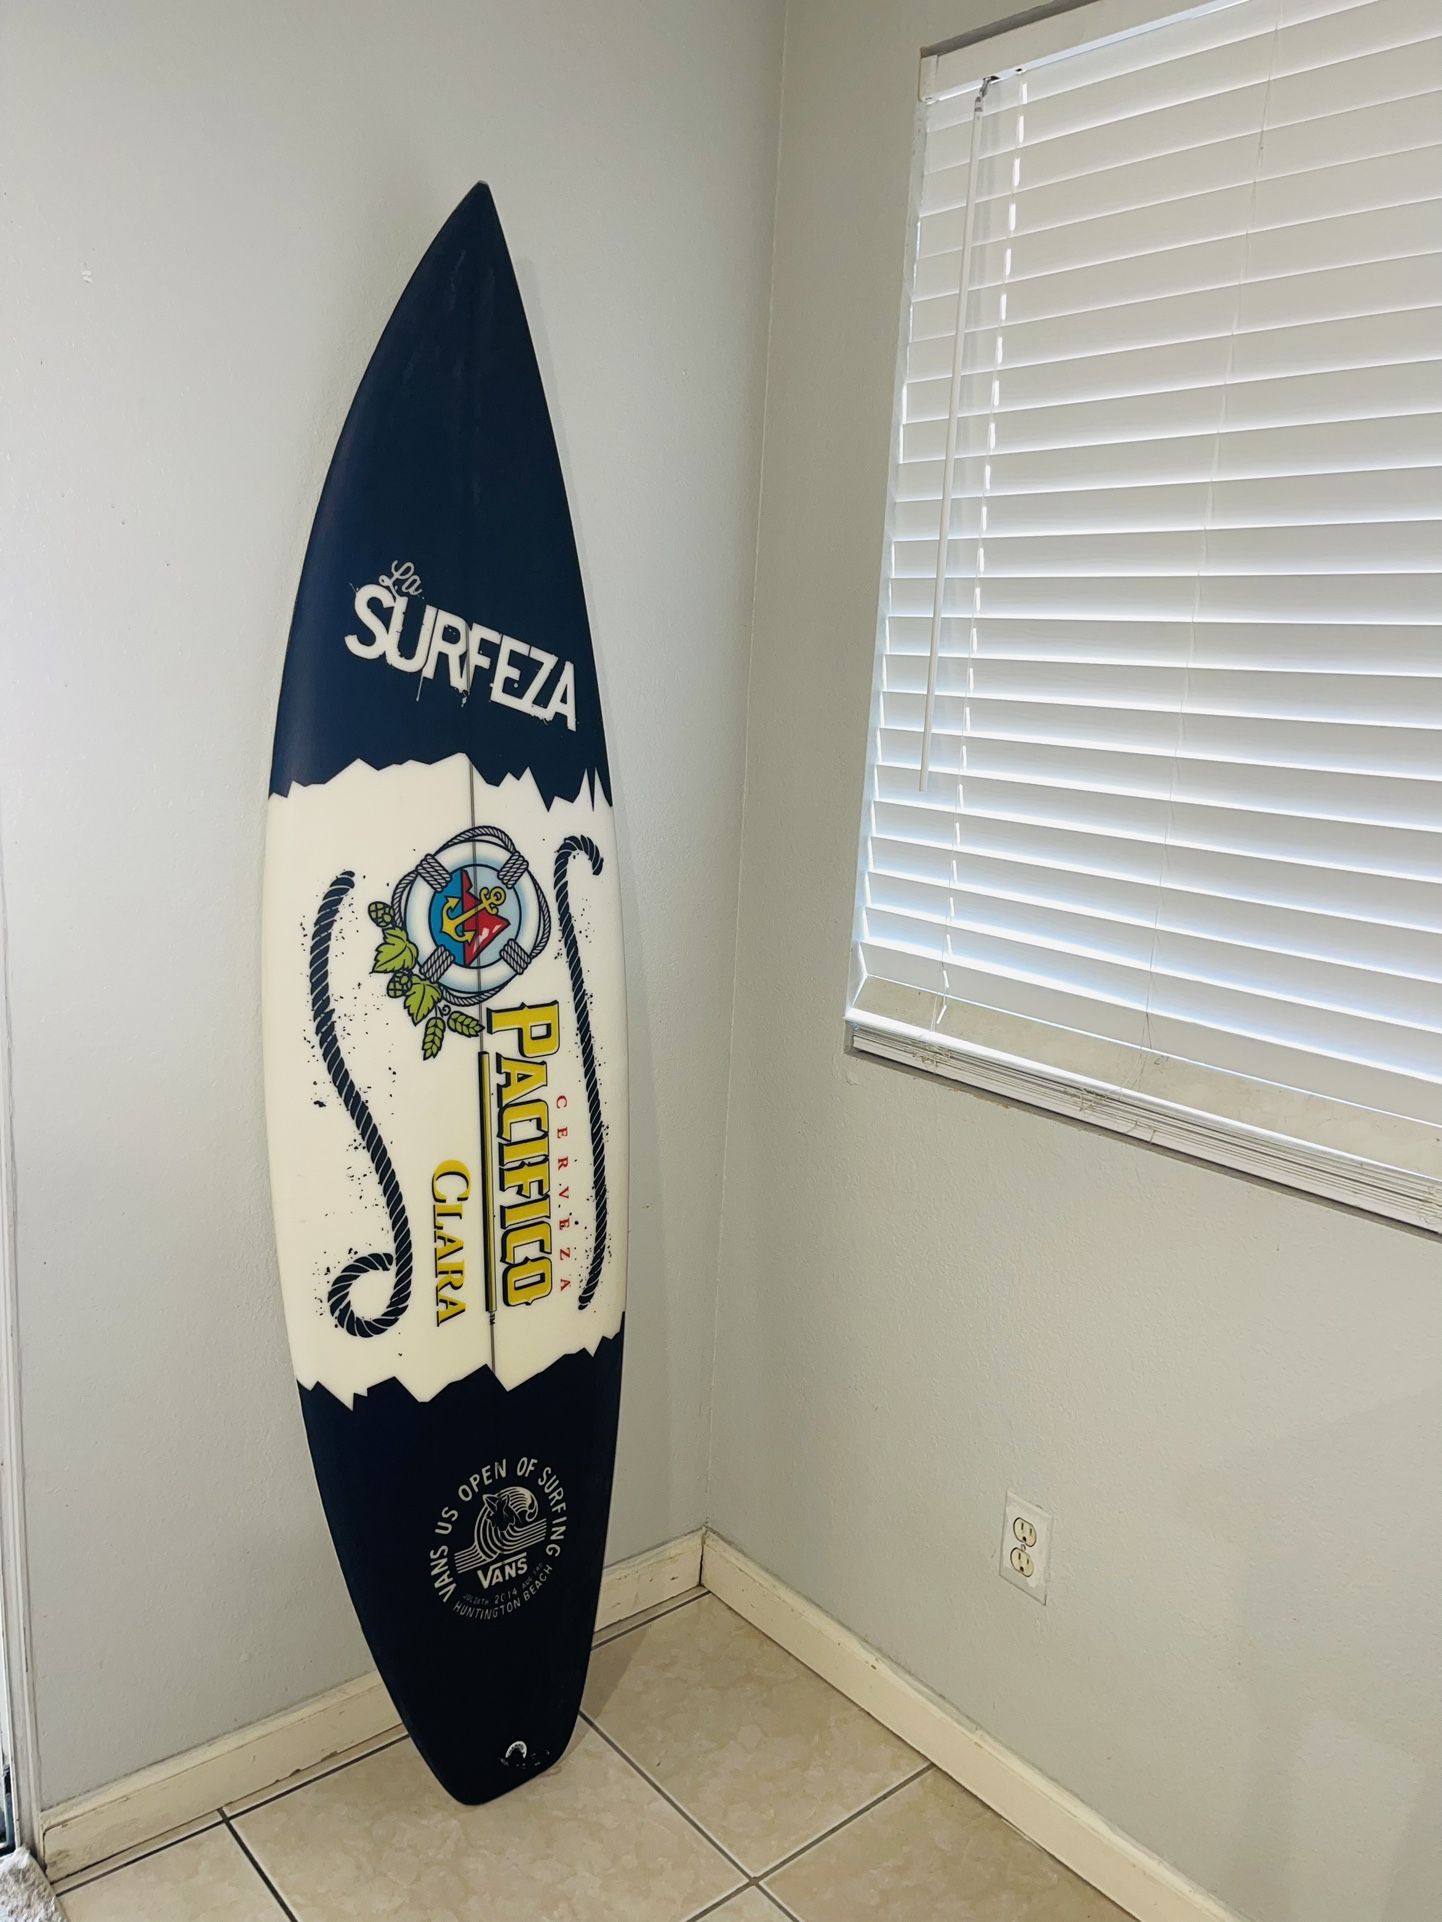 Surfboard Pacifico Beer Logos. No Scratches Like New 